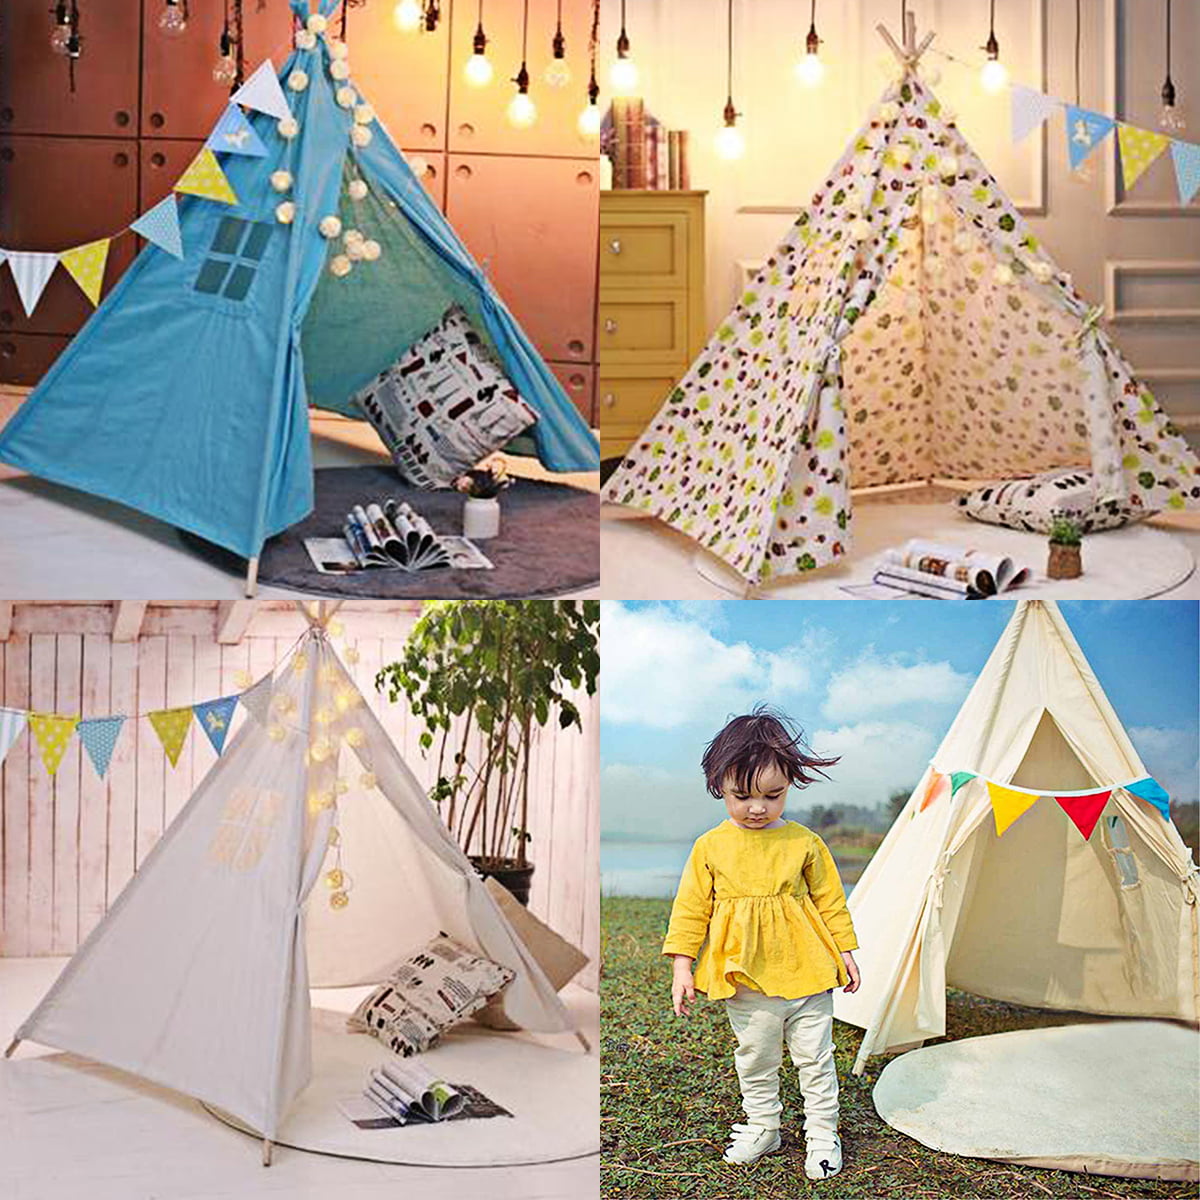 Indian Teepee Toy For Baby Kids Children Play Tent Style Outdoor Indoor 